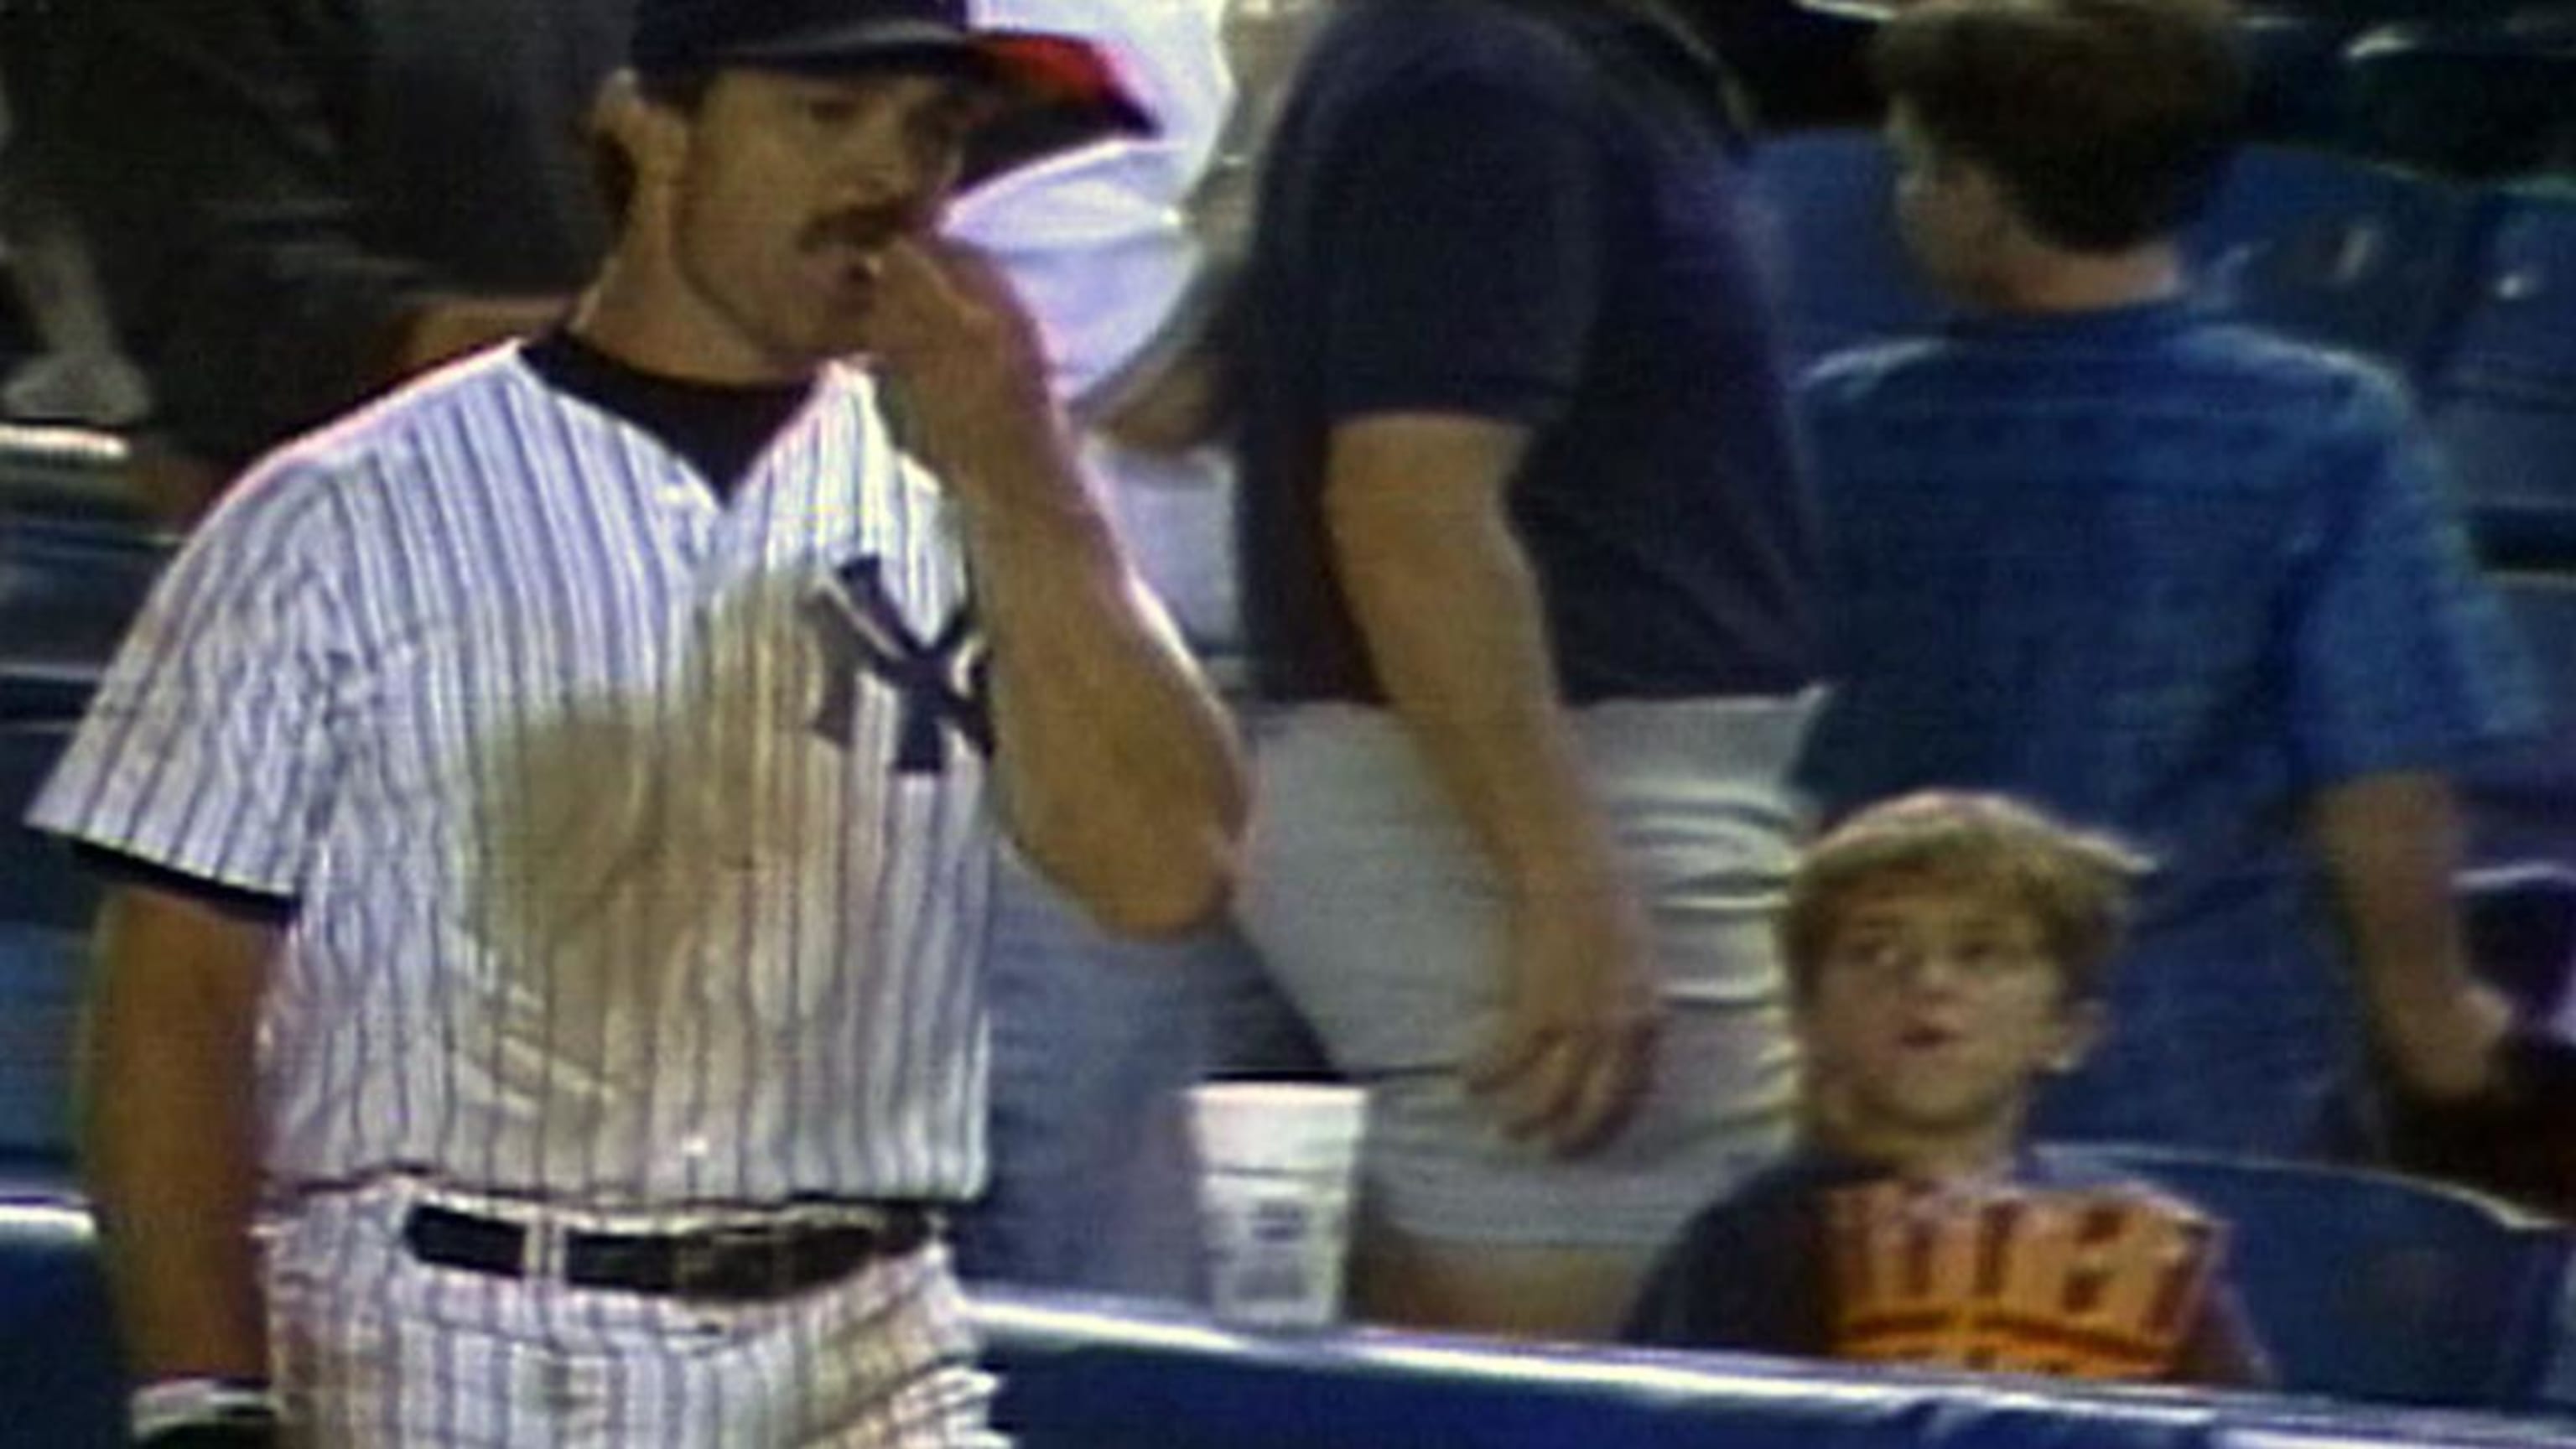 Reliving one of the strangest player rivalries in Yankees history